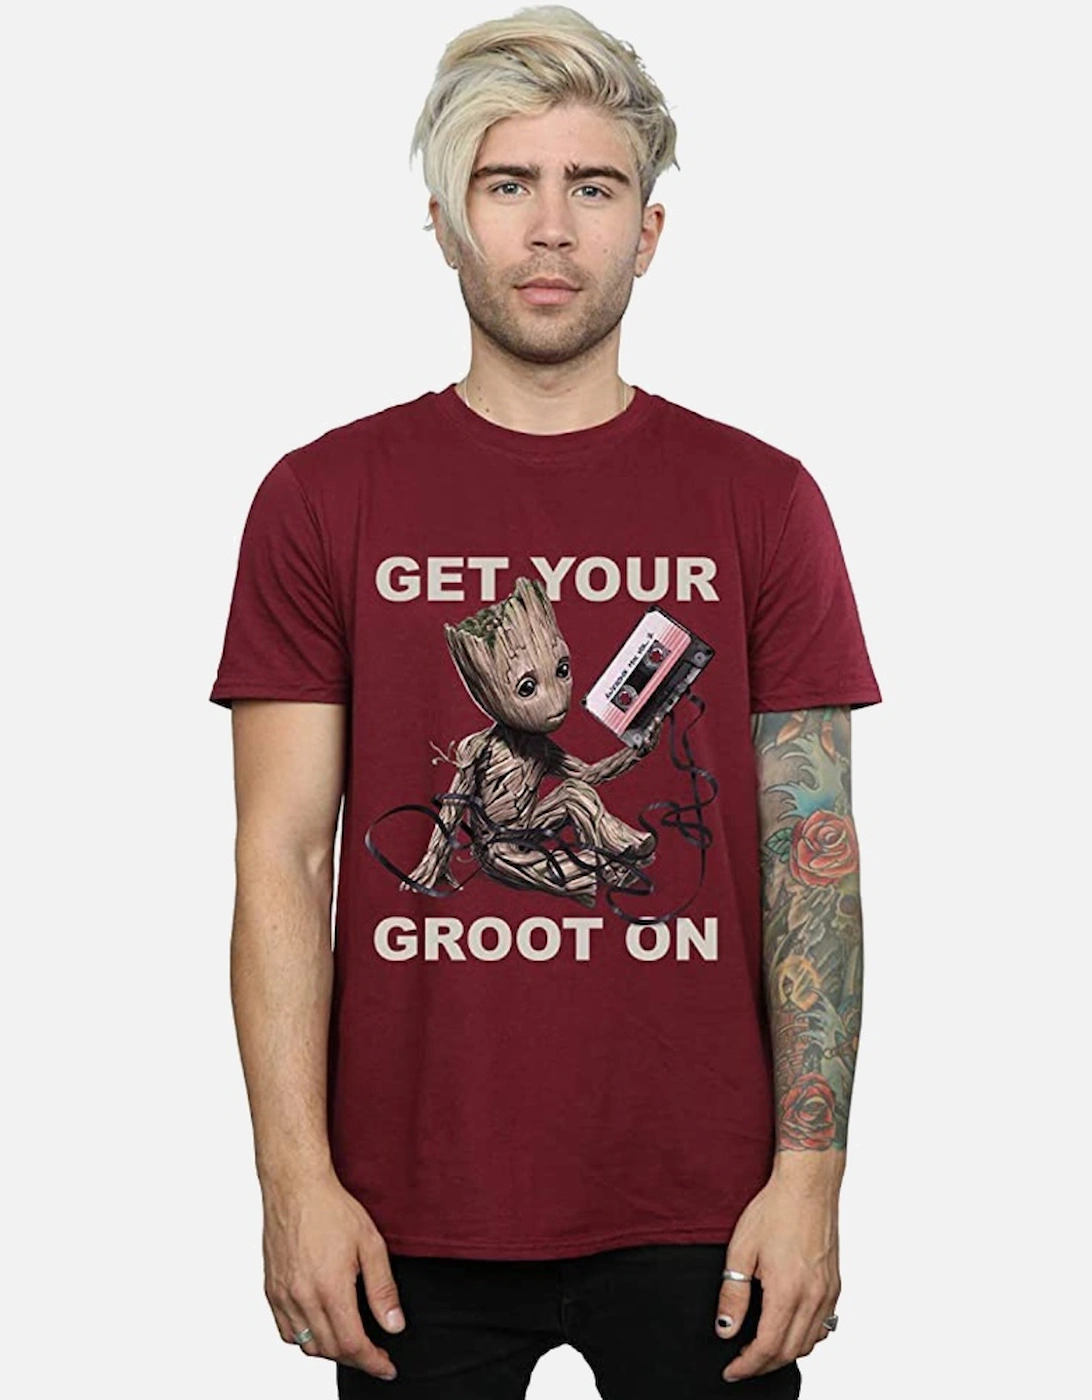 Unisex Adult Get Your Groot On T-Shirt